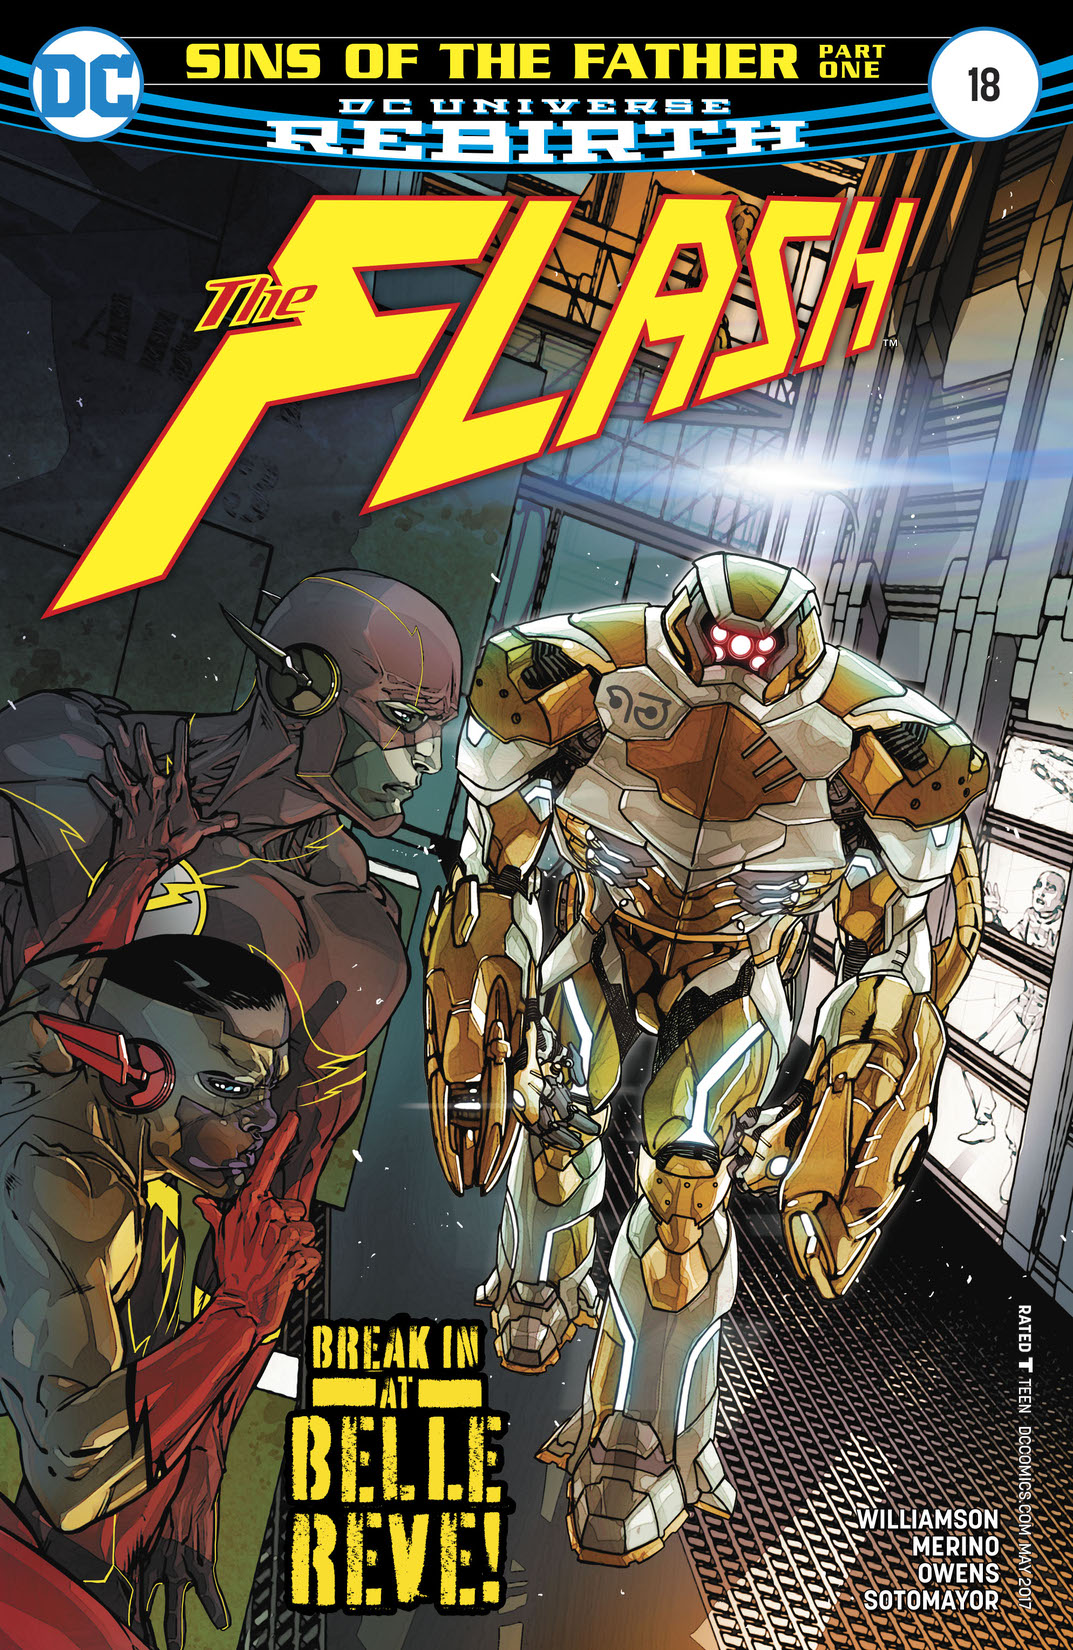 The Flash (2016-) #18 preview images